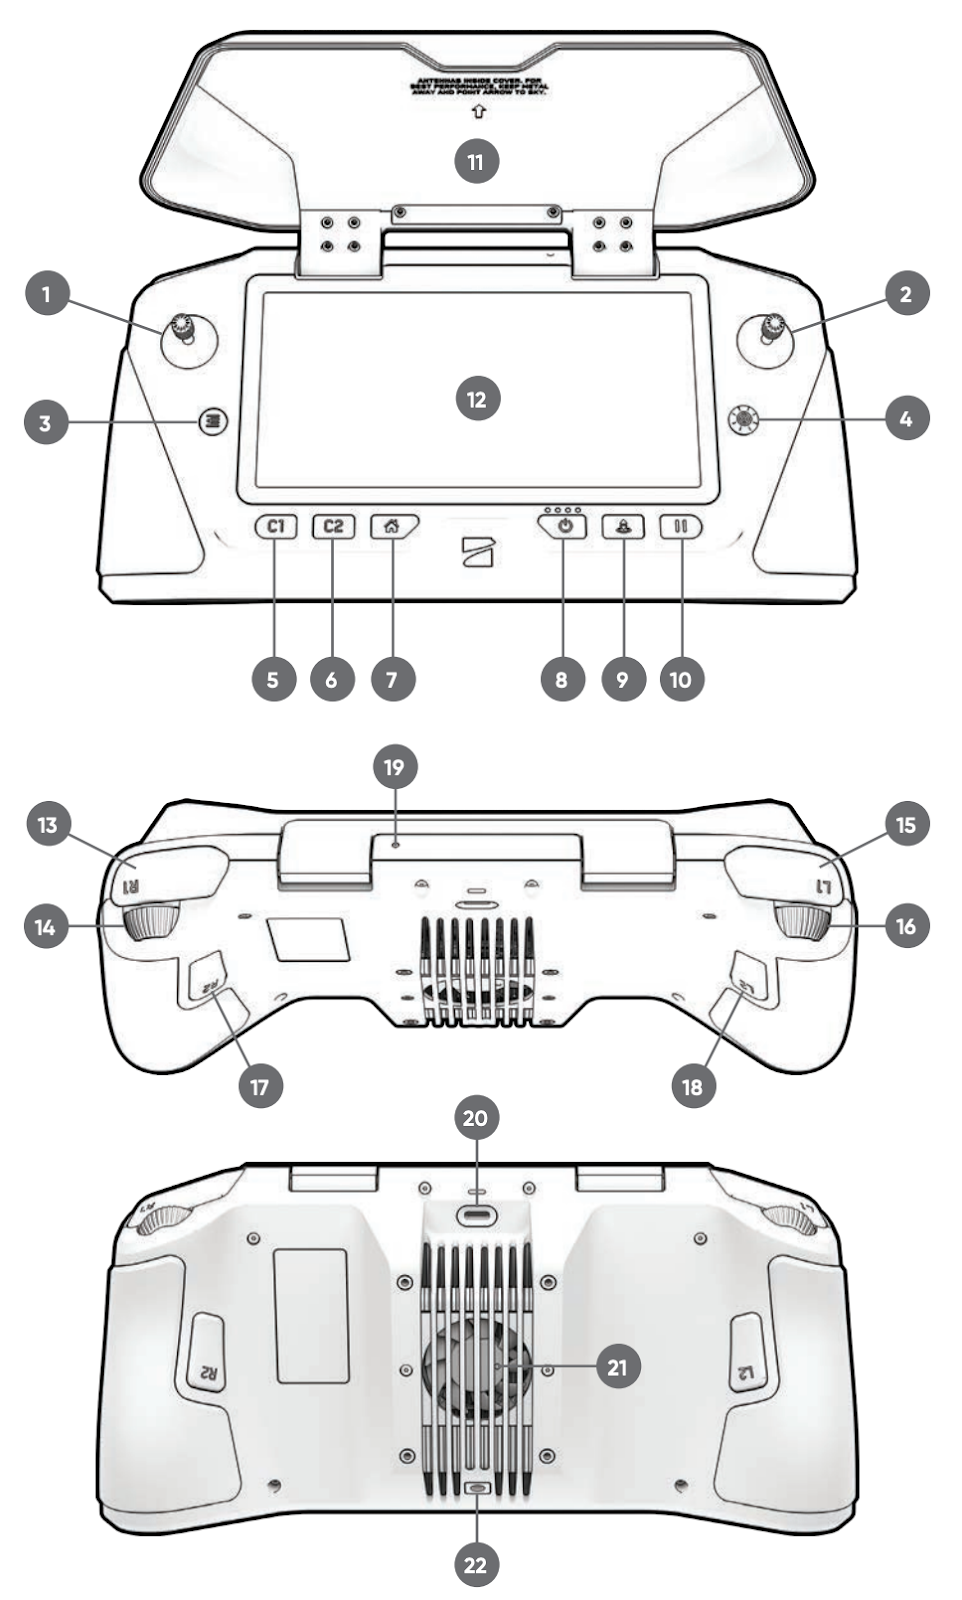 CS_C78_media_ill_controller-overview.png